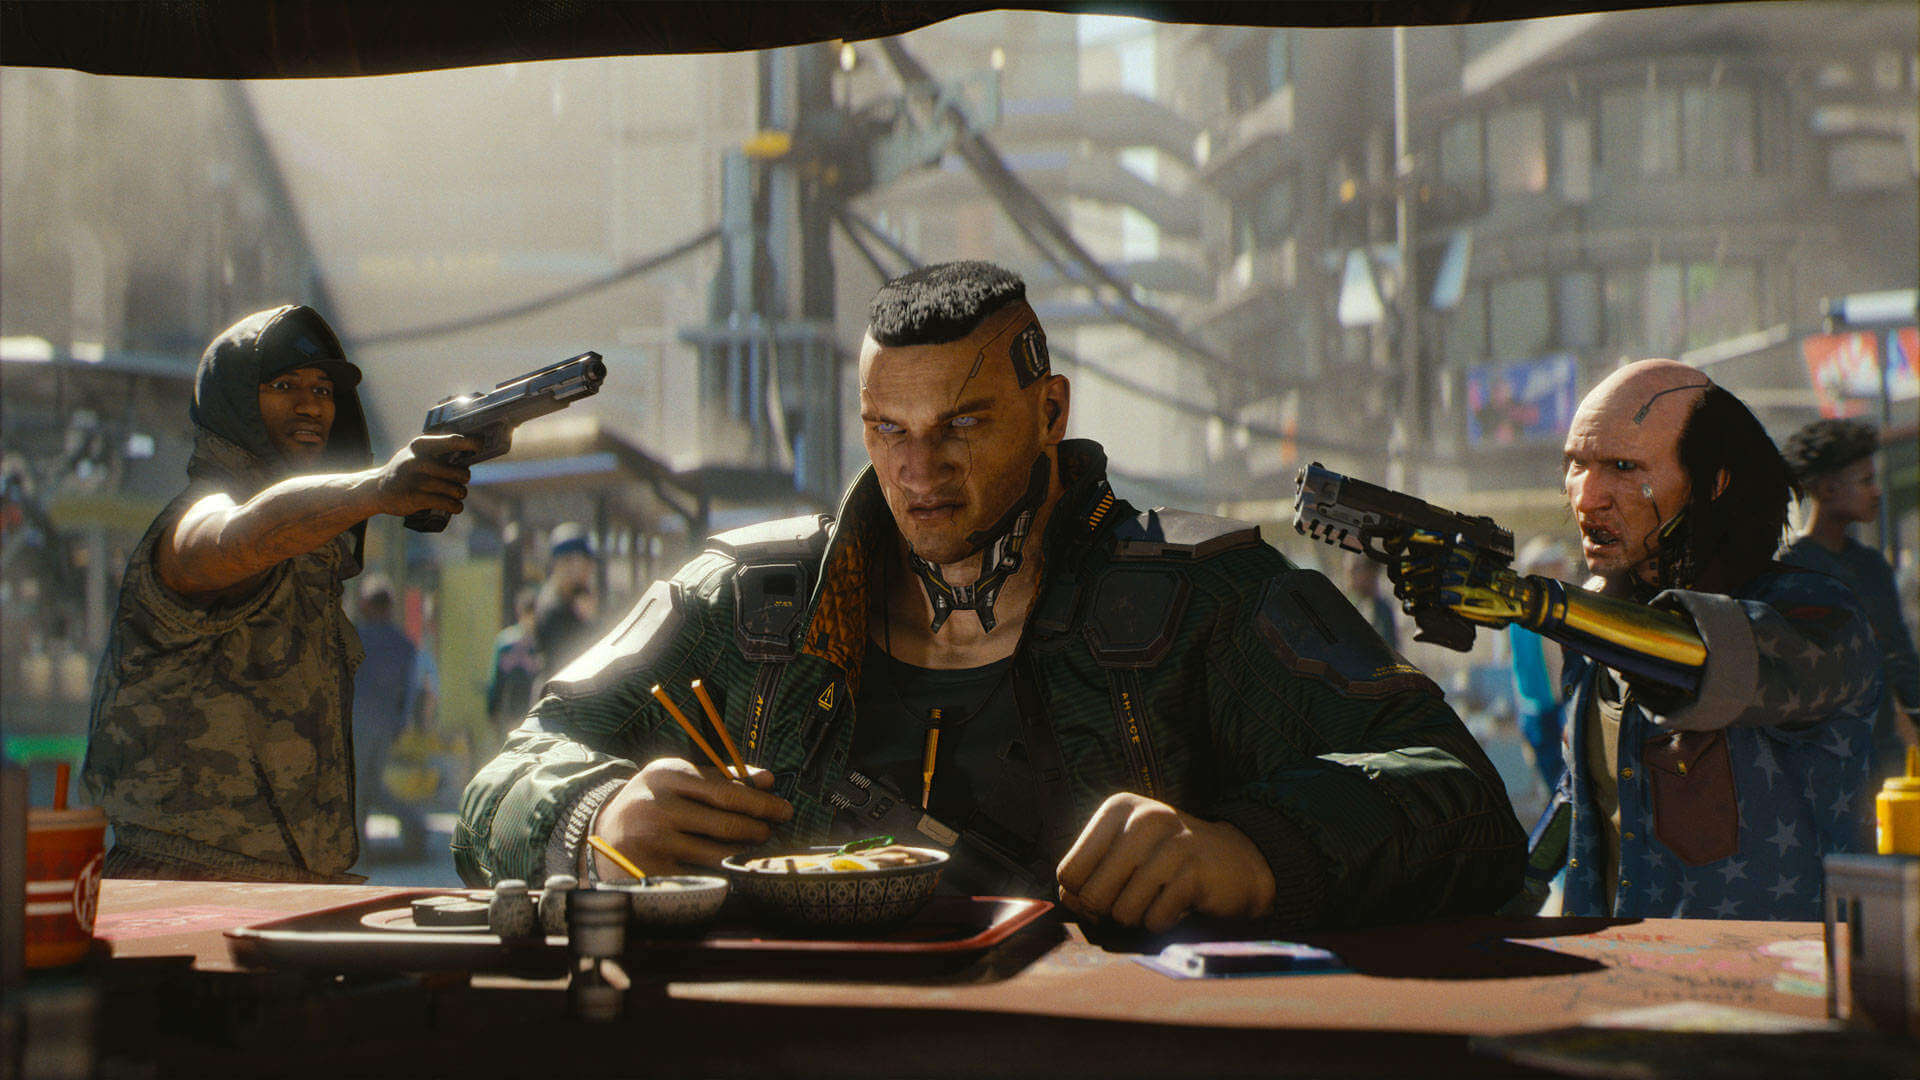 Cyberpunk 2077 Launches on Stadia November 19th